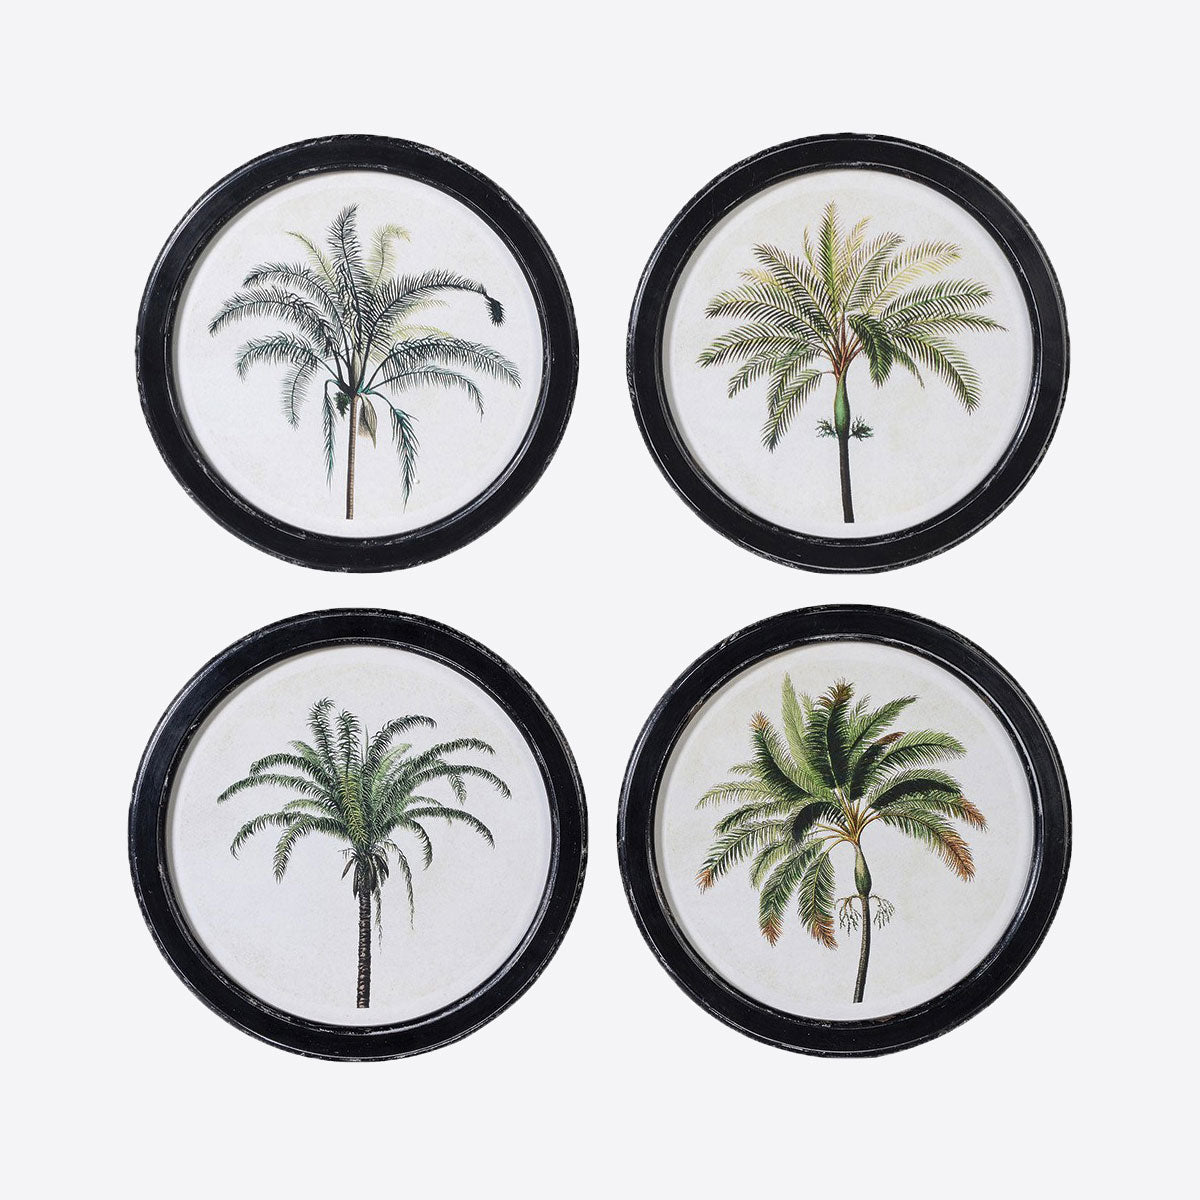 Set of 4 Palm Pictures Joanna Wood Shop